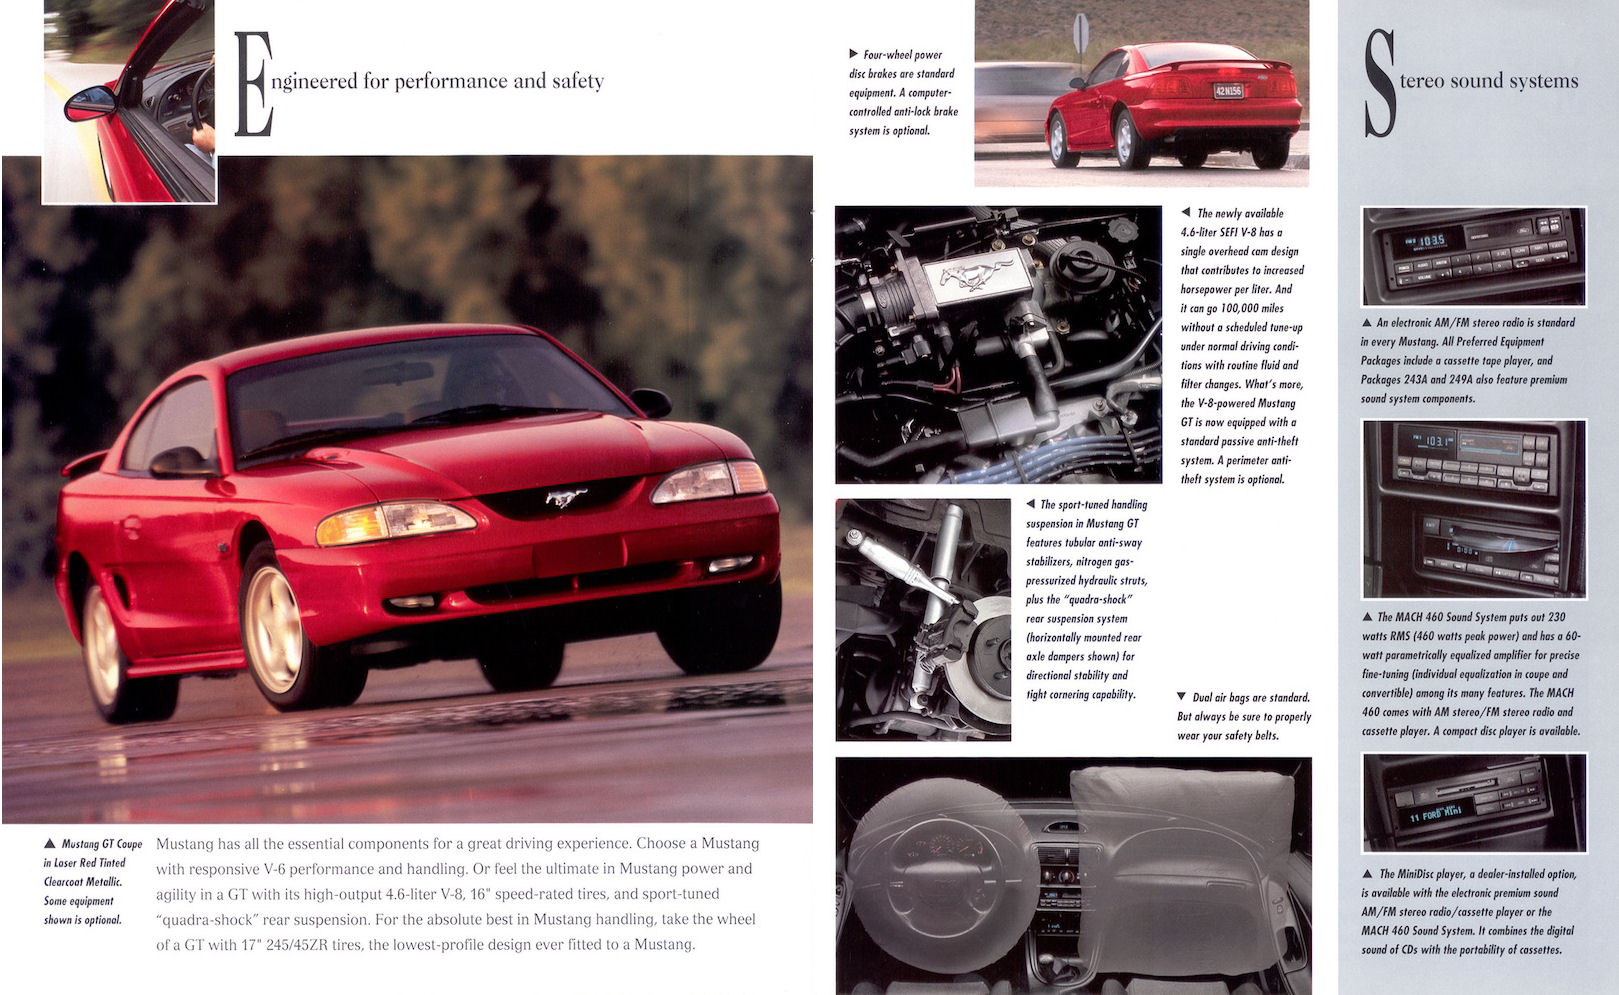 1996_Ford_Mustang-08-09